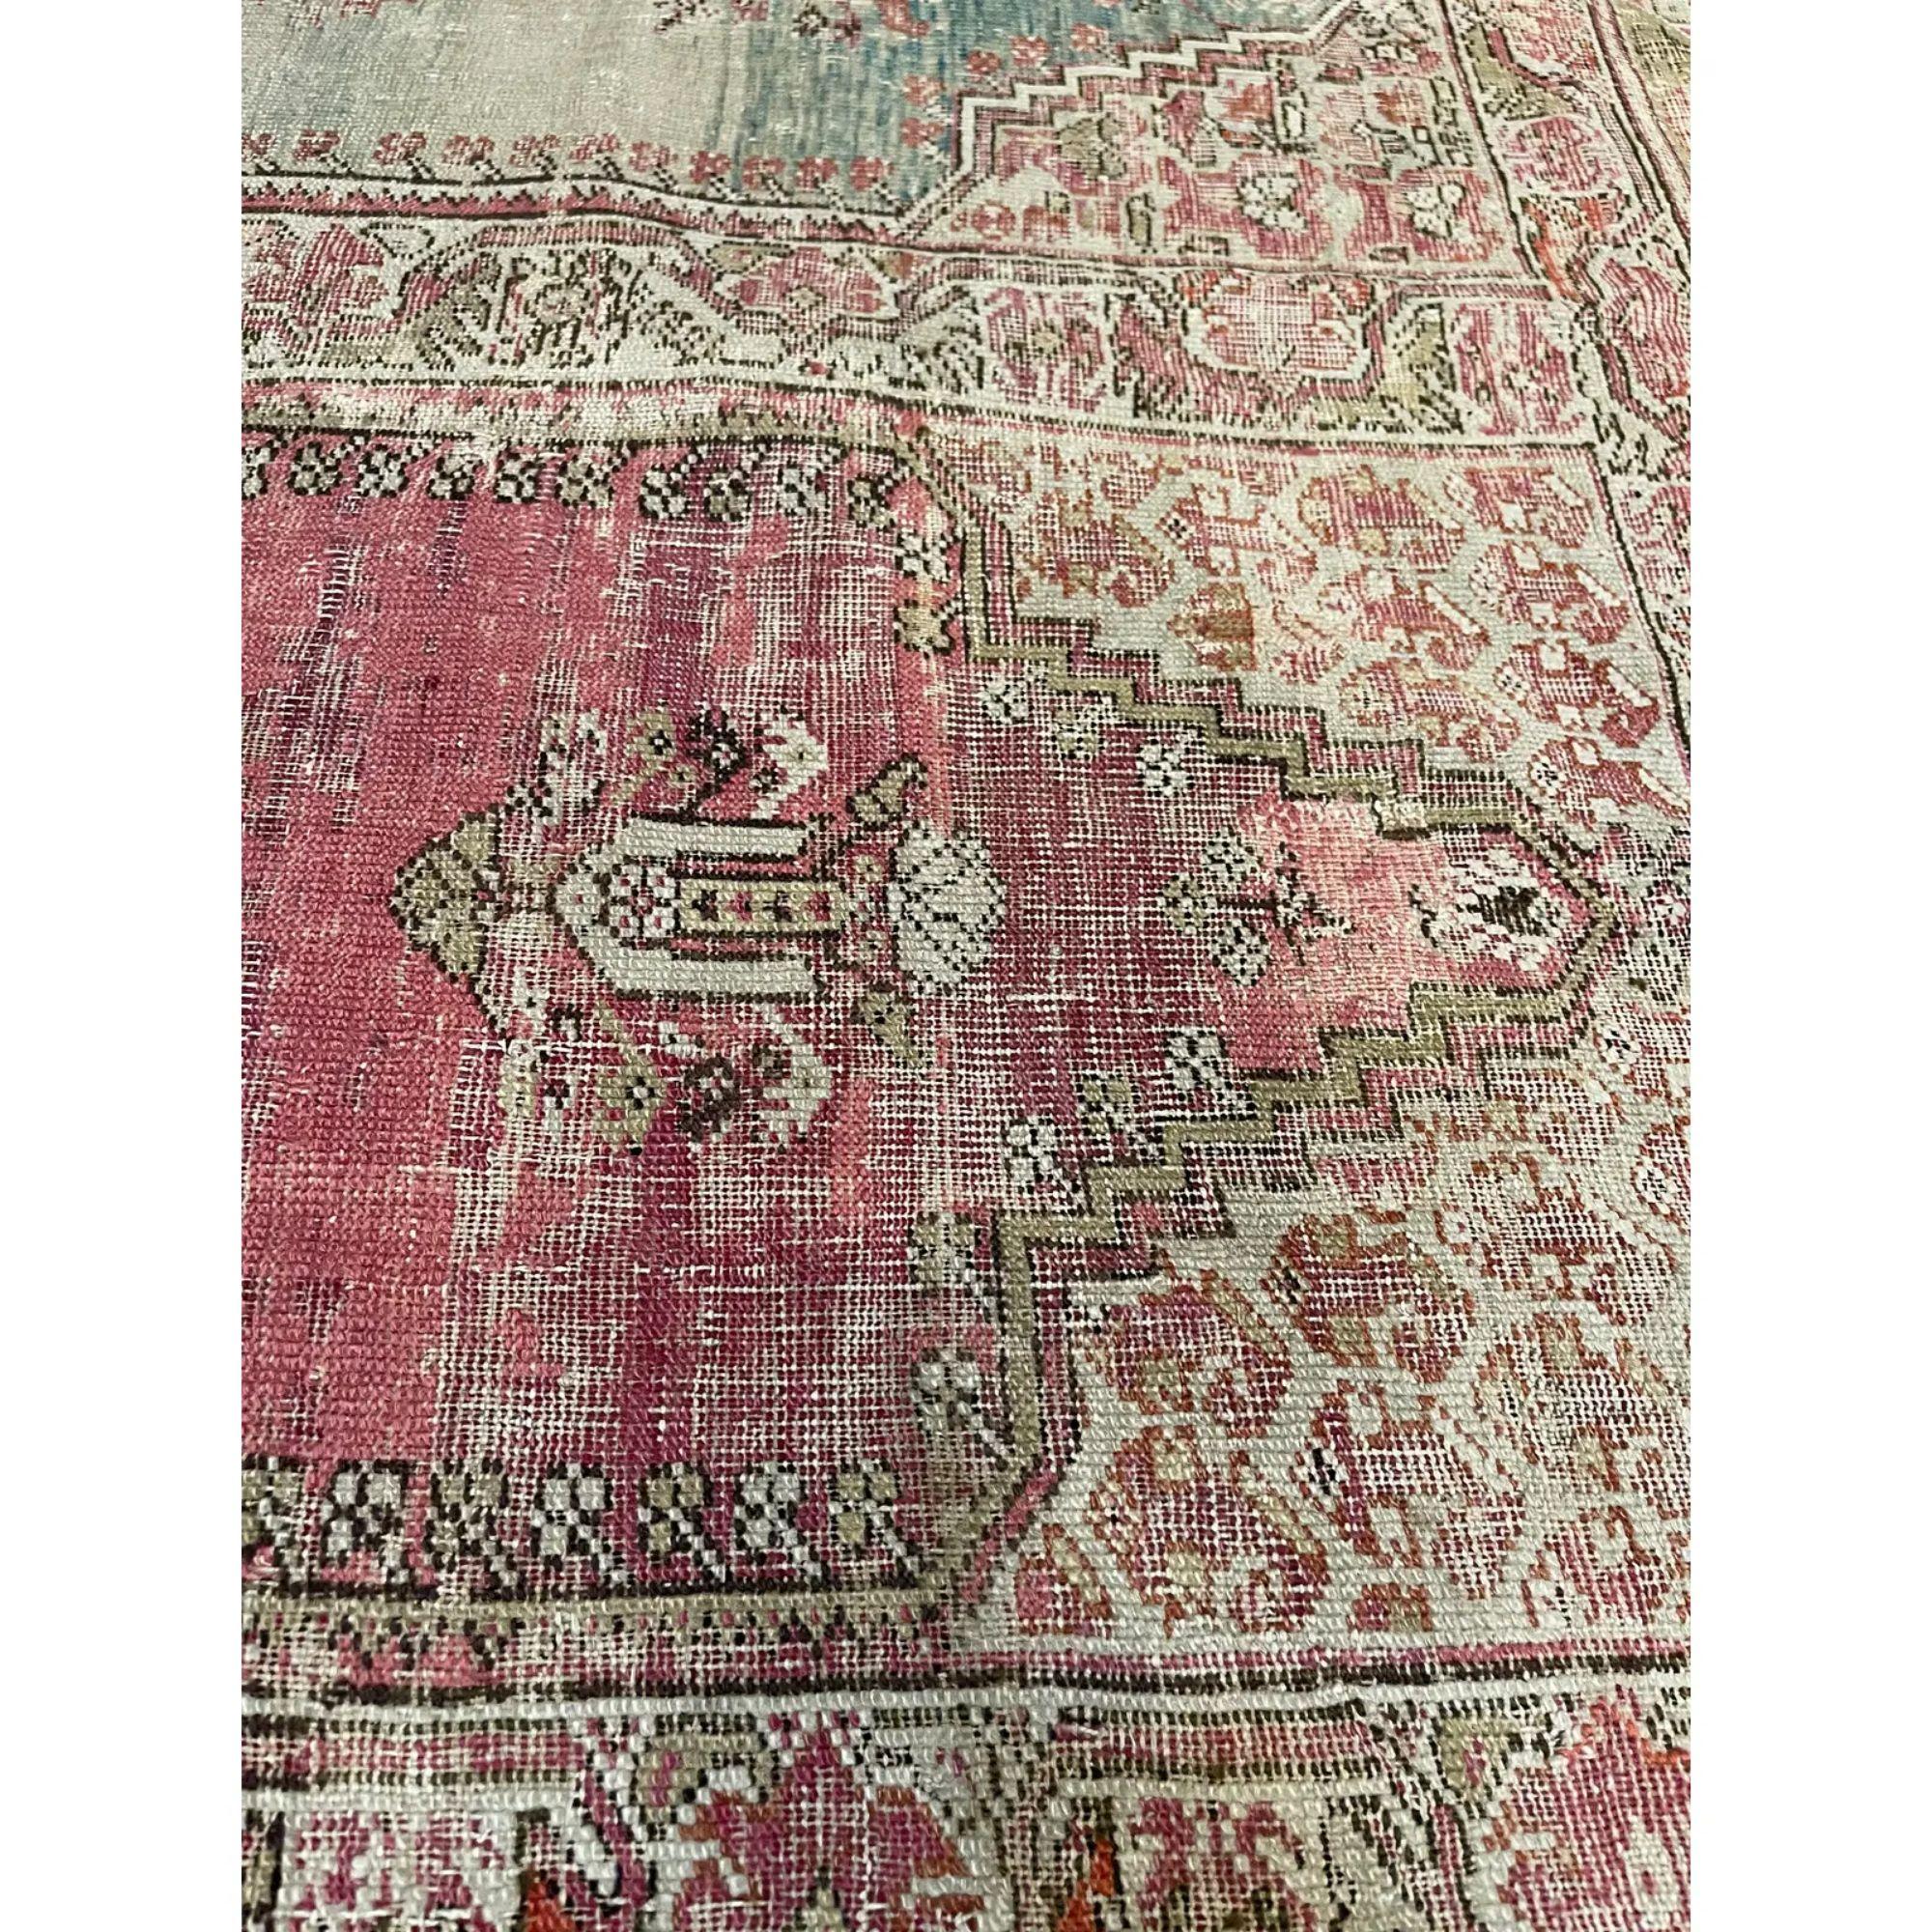 Antique Turkish Family Prayer Rug From 1850 10'5''x8'1''

one of a kind 1 of 1

more info upon request